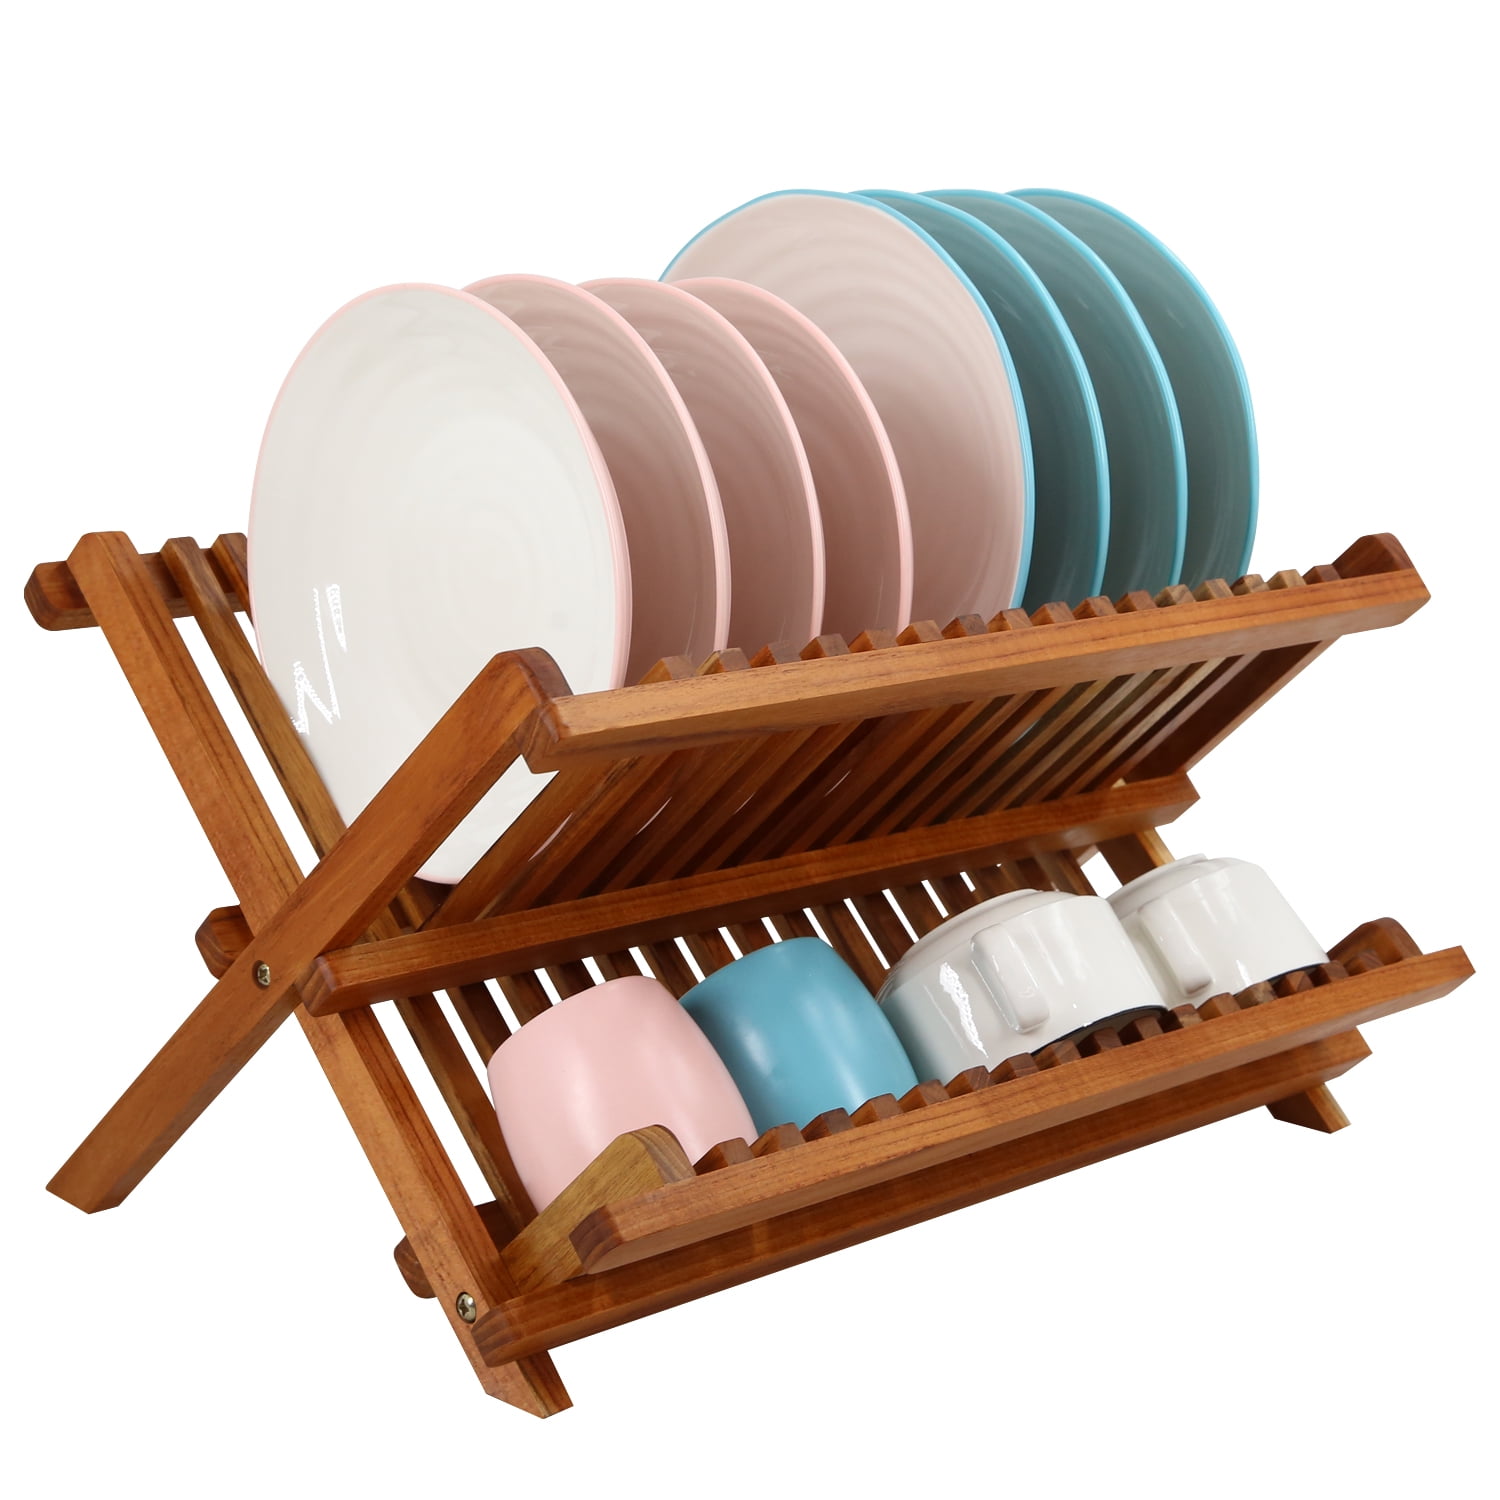  Greenual Teak Dish Drying Rack with Utensil Holder, 3 Tier  Collapsible Dish Rack, Wooden Dish Racks for Kitchen Counter, Large Folding  Drying Holder with Absorbent Dish Drying Mat